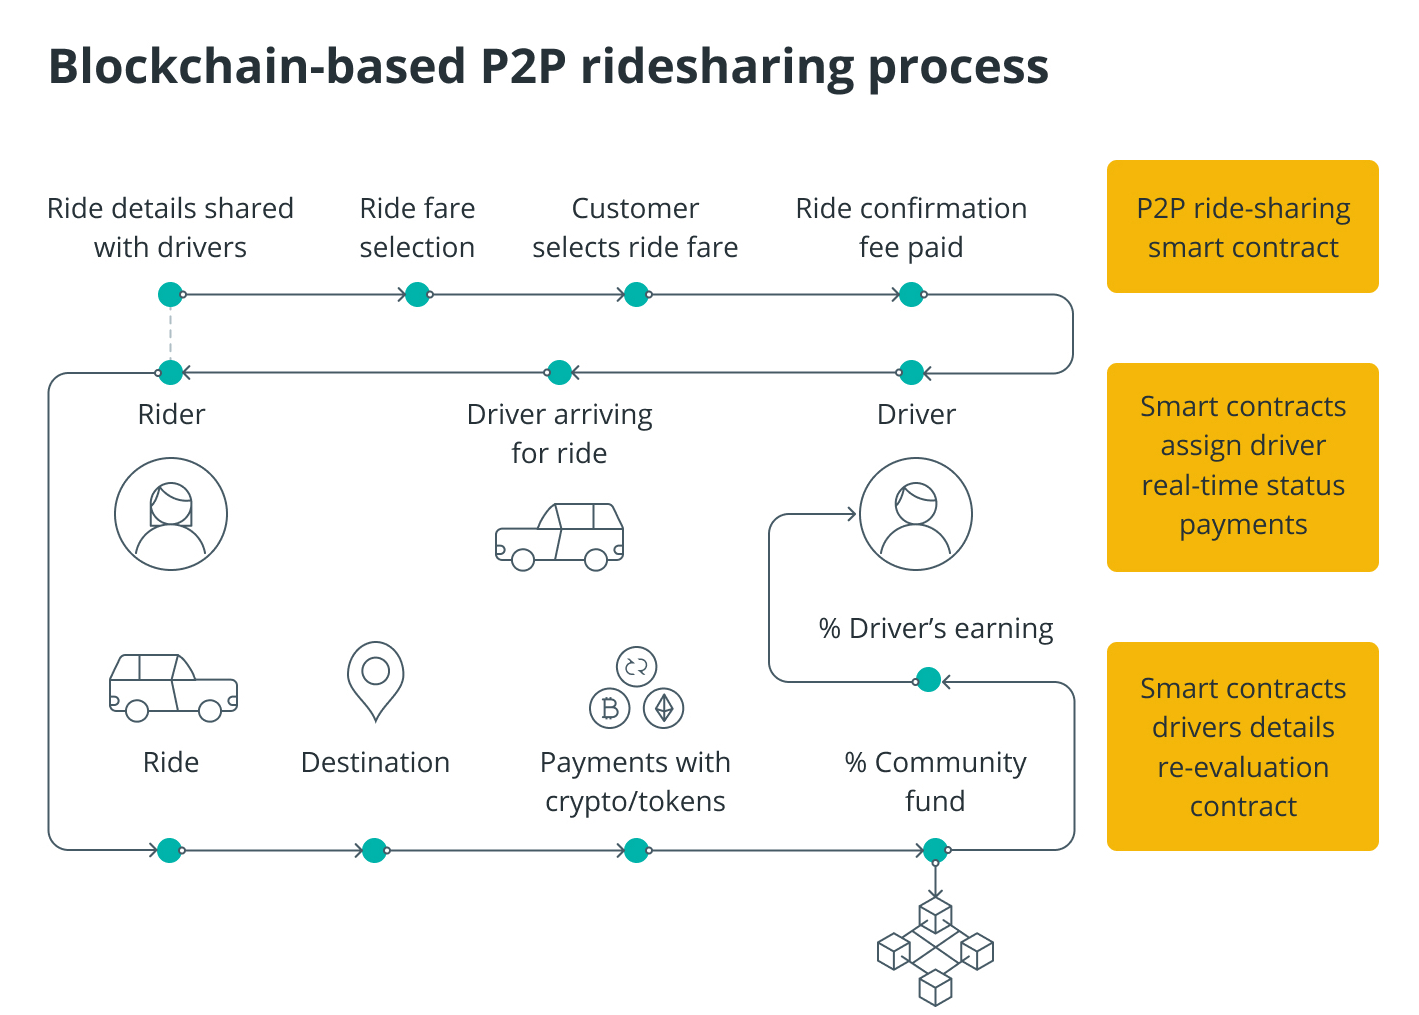 Infographic illustrating the process of a blockchain-based peer-to-peer (P2P) ridesharing system, detailing steps from ride details sharing to payment distribution via smart contracts.